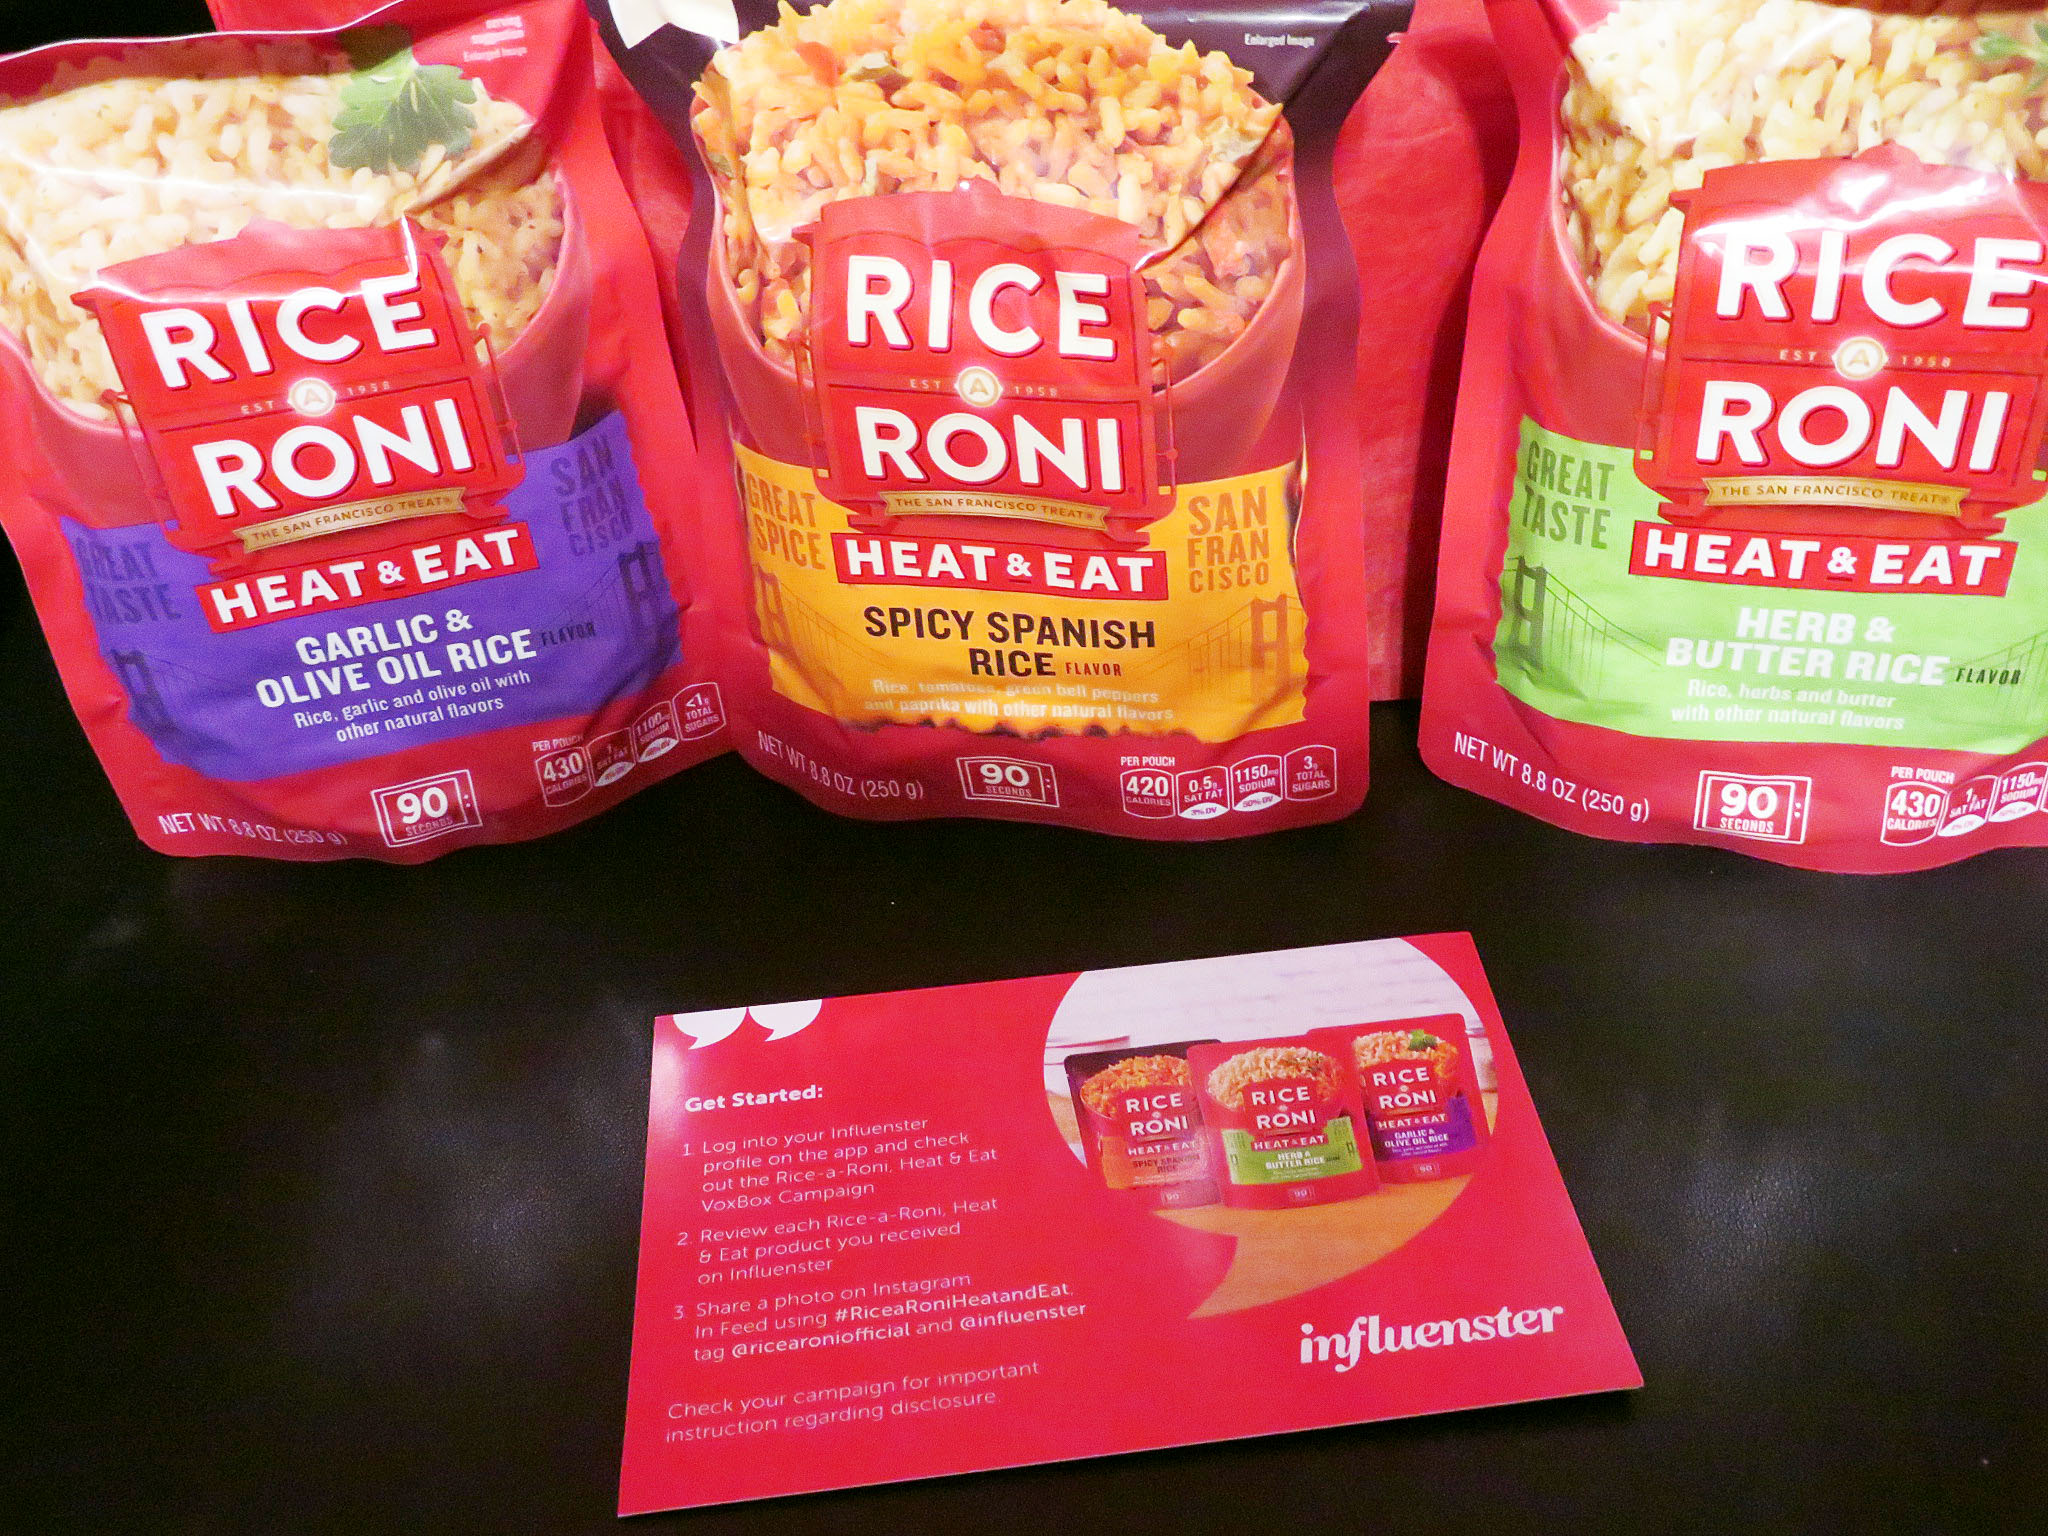 REVIEW: Rice-a-Roni Heat & Eat Microwavable Rice – Is It Worth Buying?